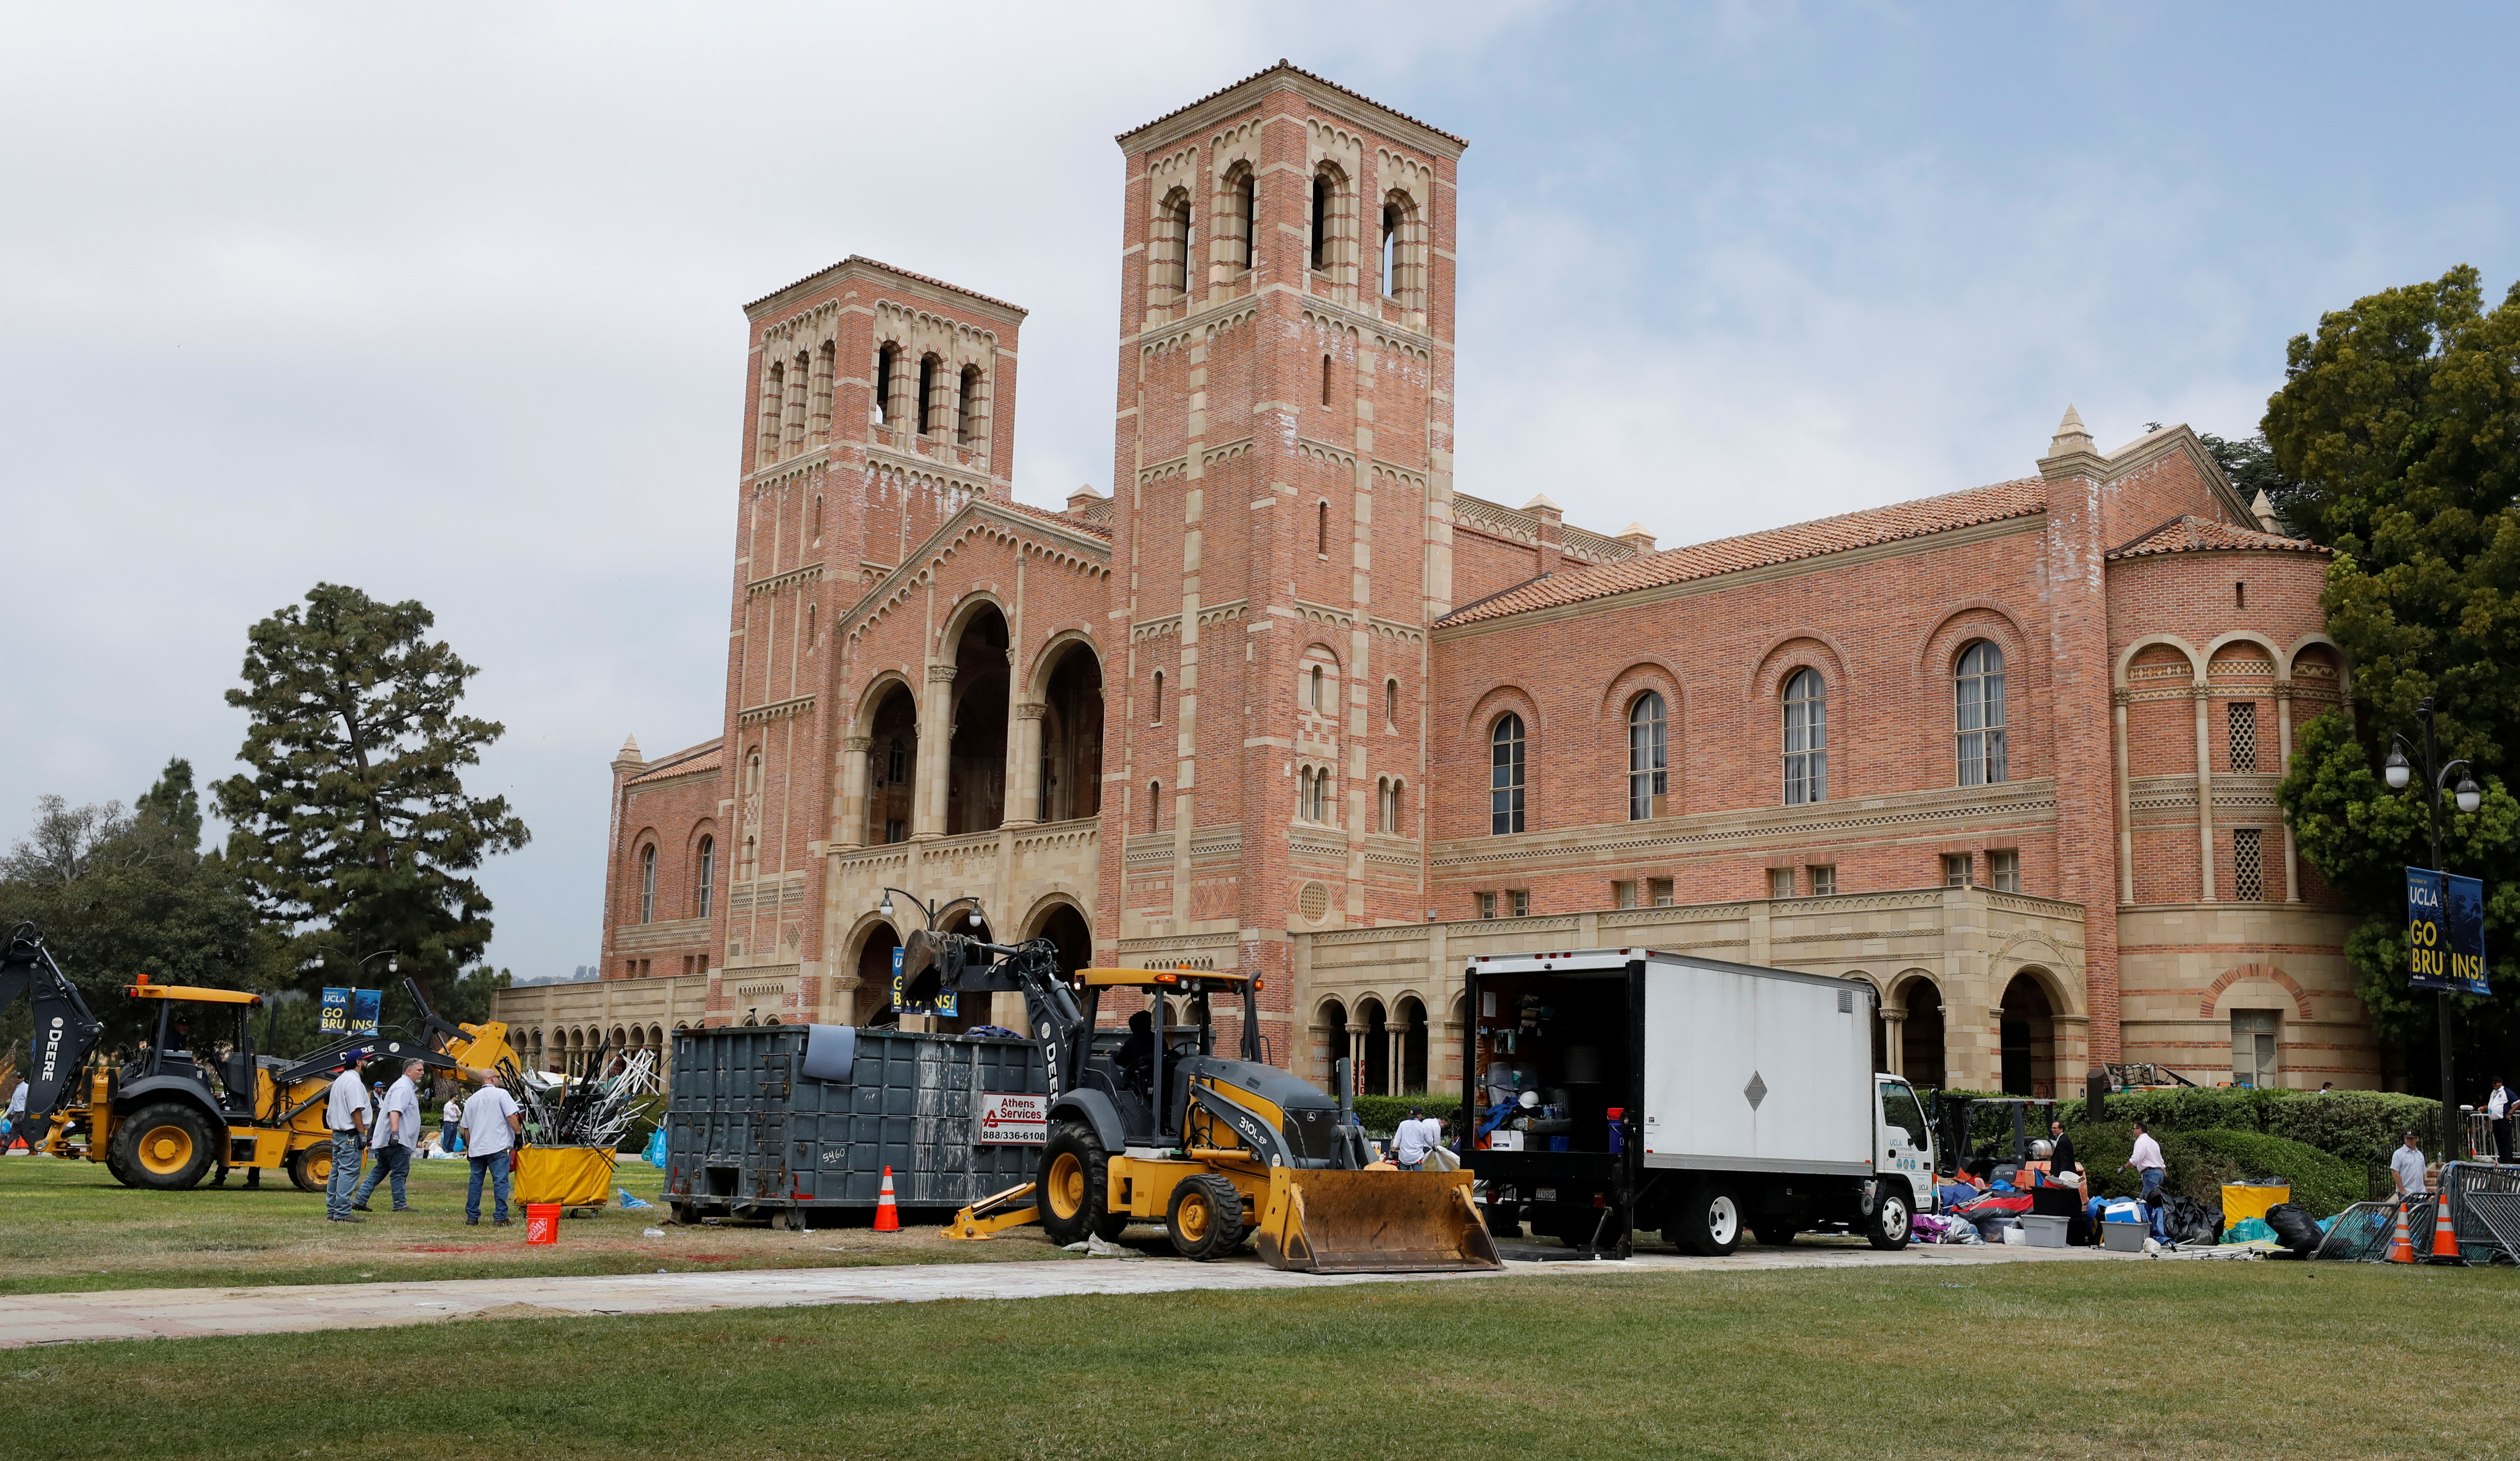 Workers remove the remnants of a protest encampment at University of California Los Angeles